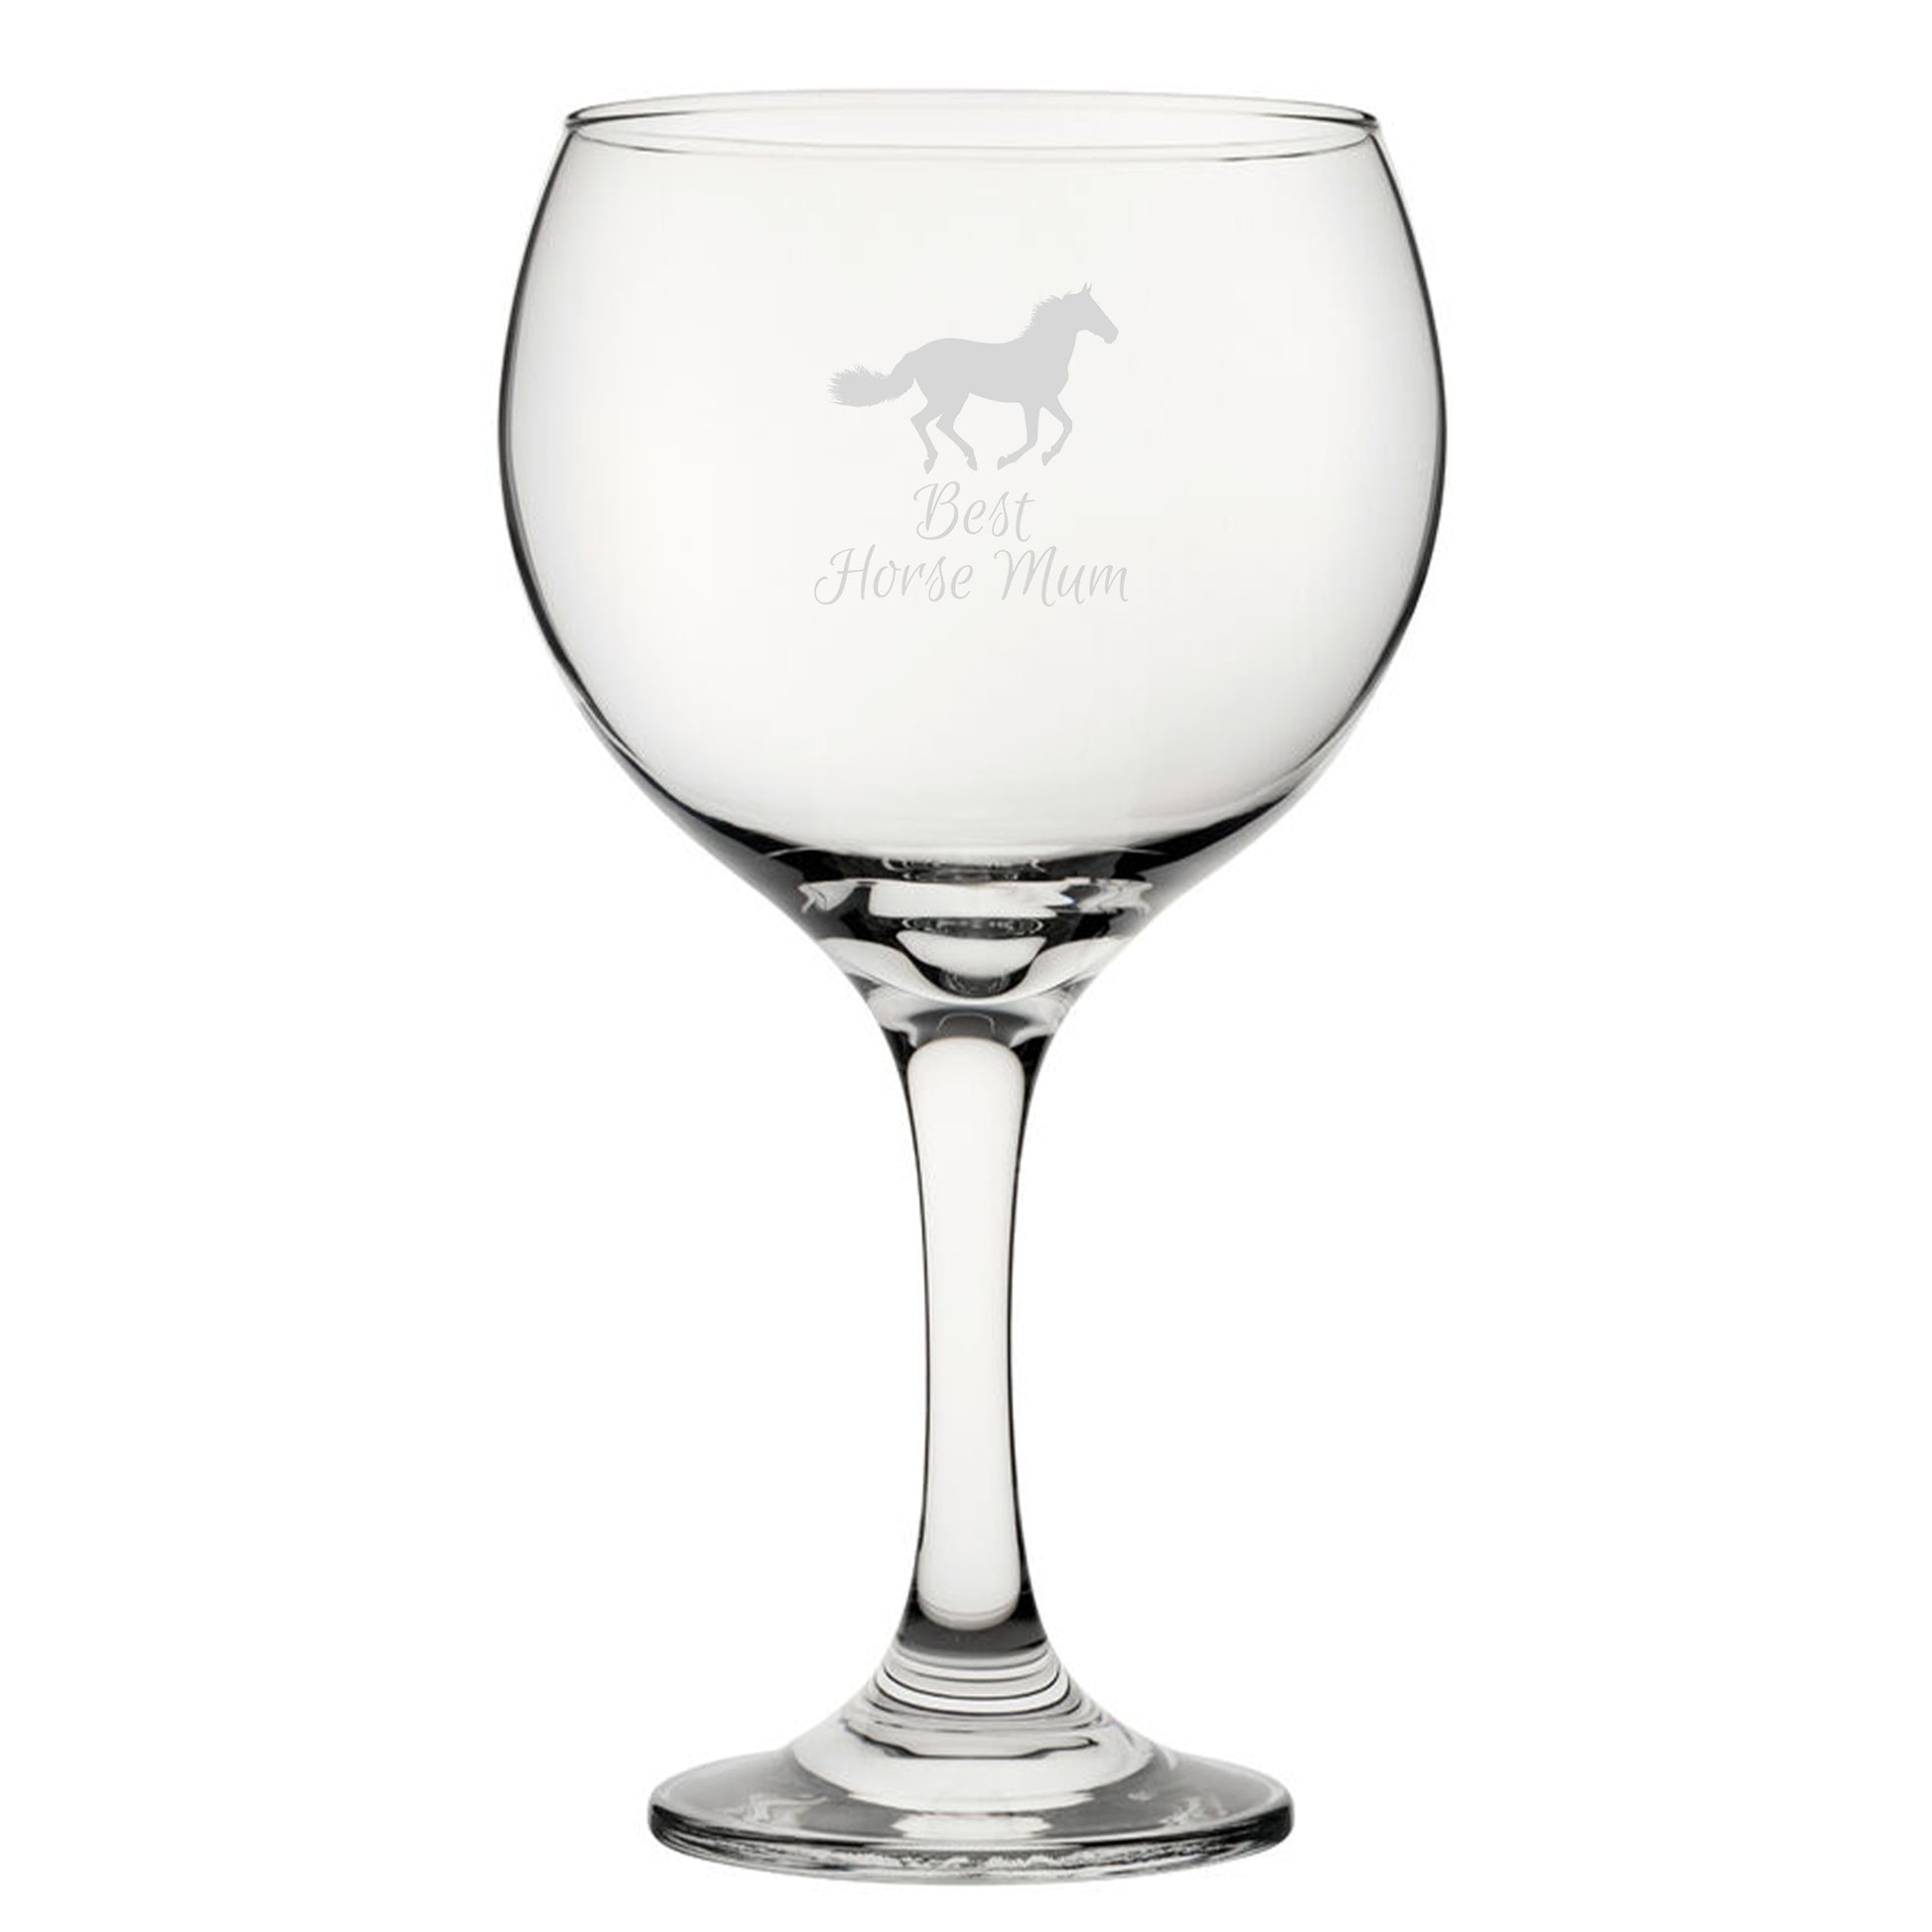 Best Horse Dad - Engraved Novelty Gin Balloon Cocktail Glass Image 2